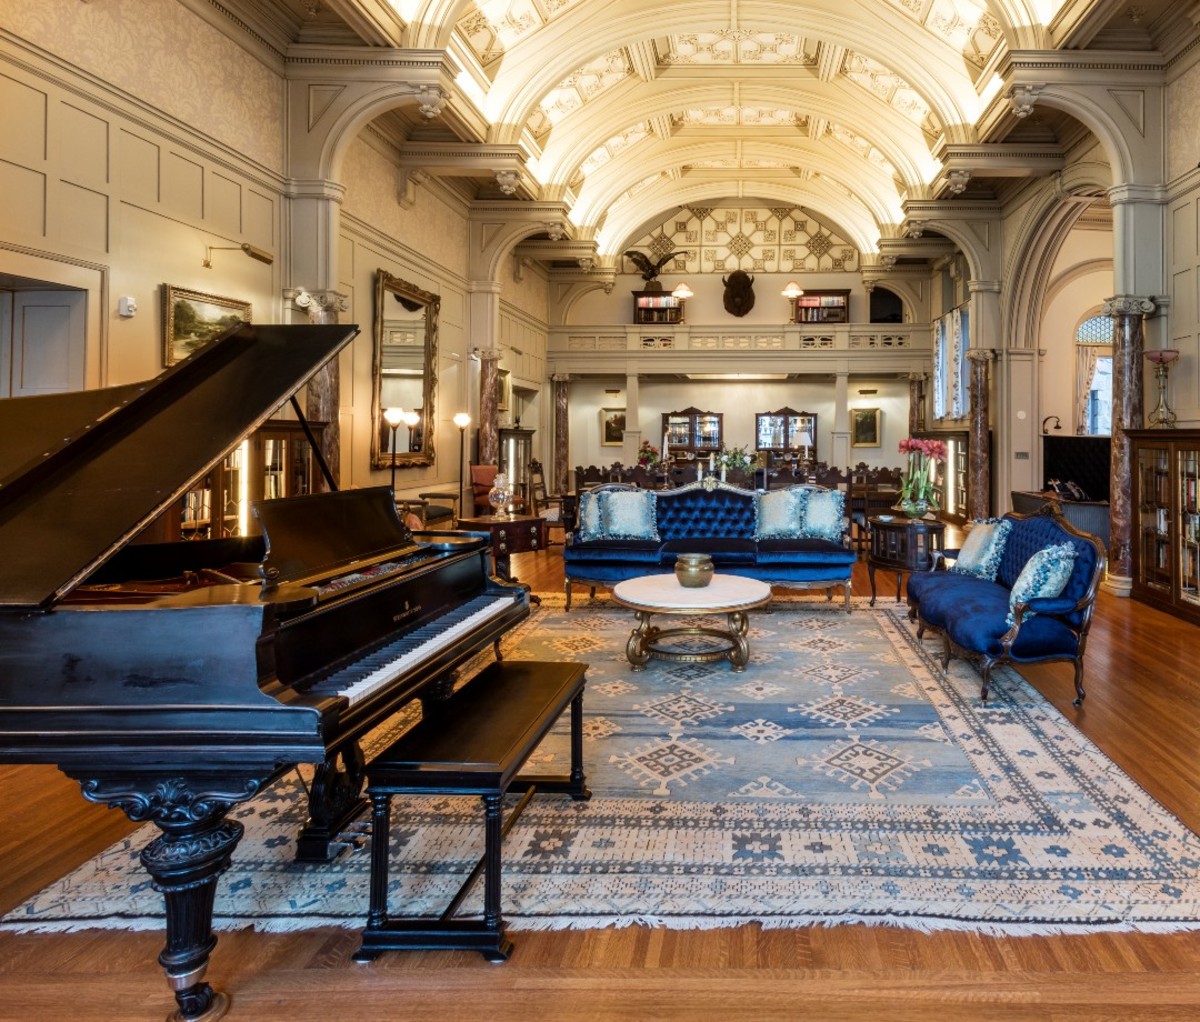 Opulent room with piano, blue velvet sofas, and blue rug